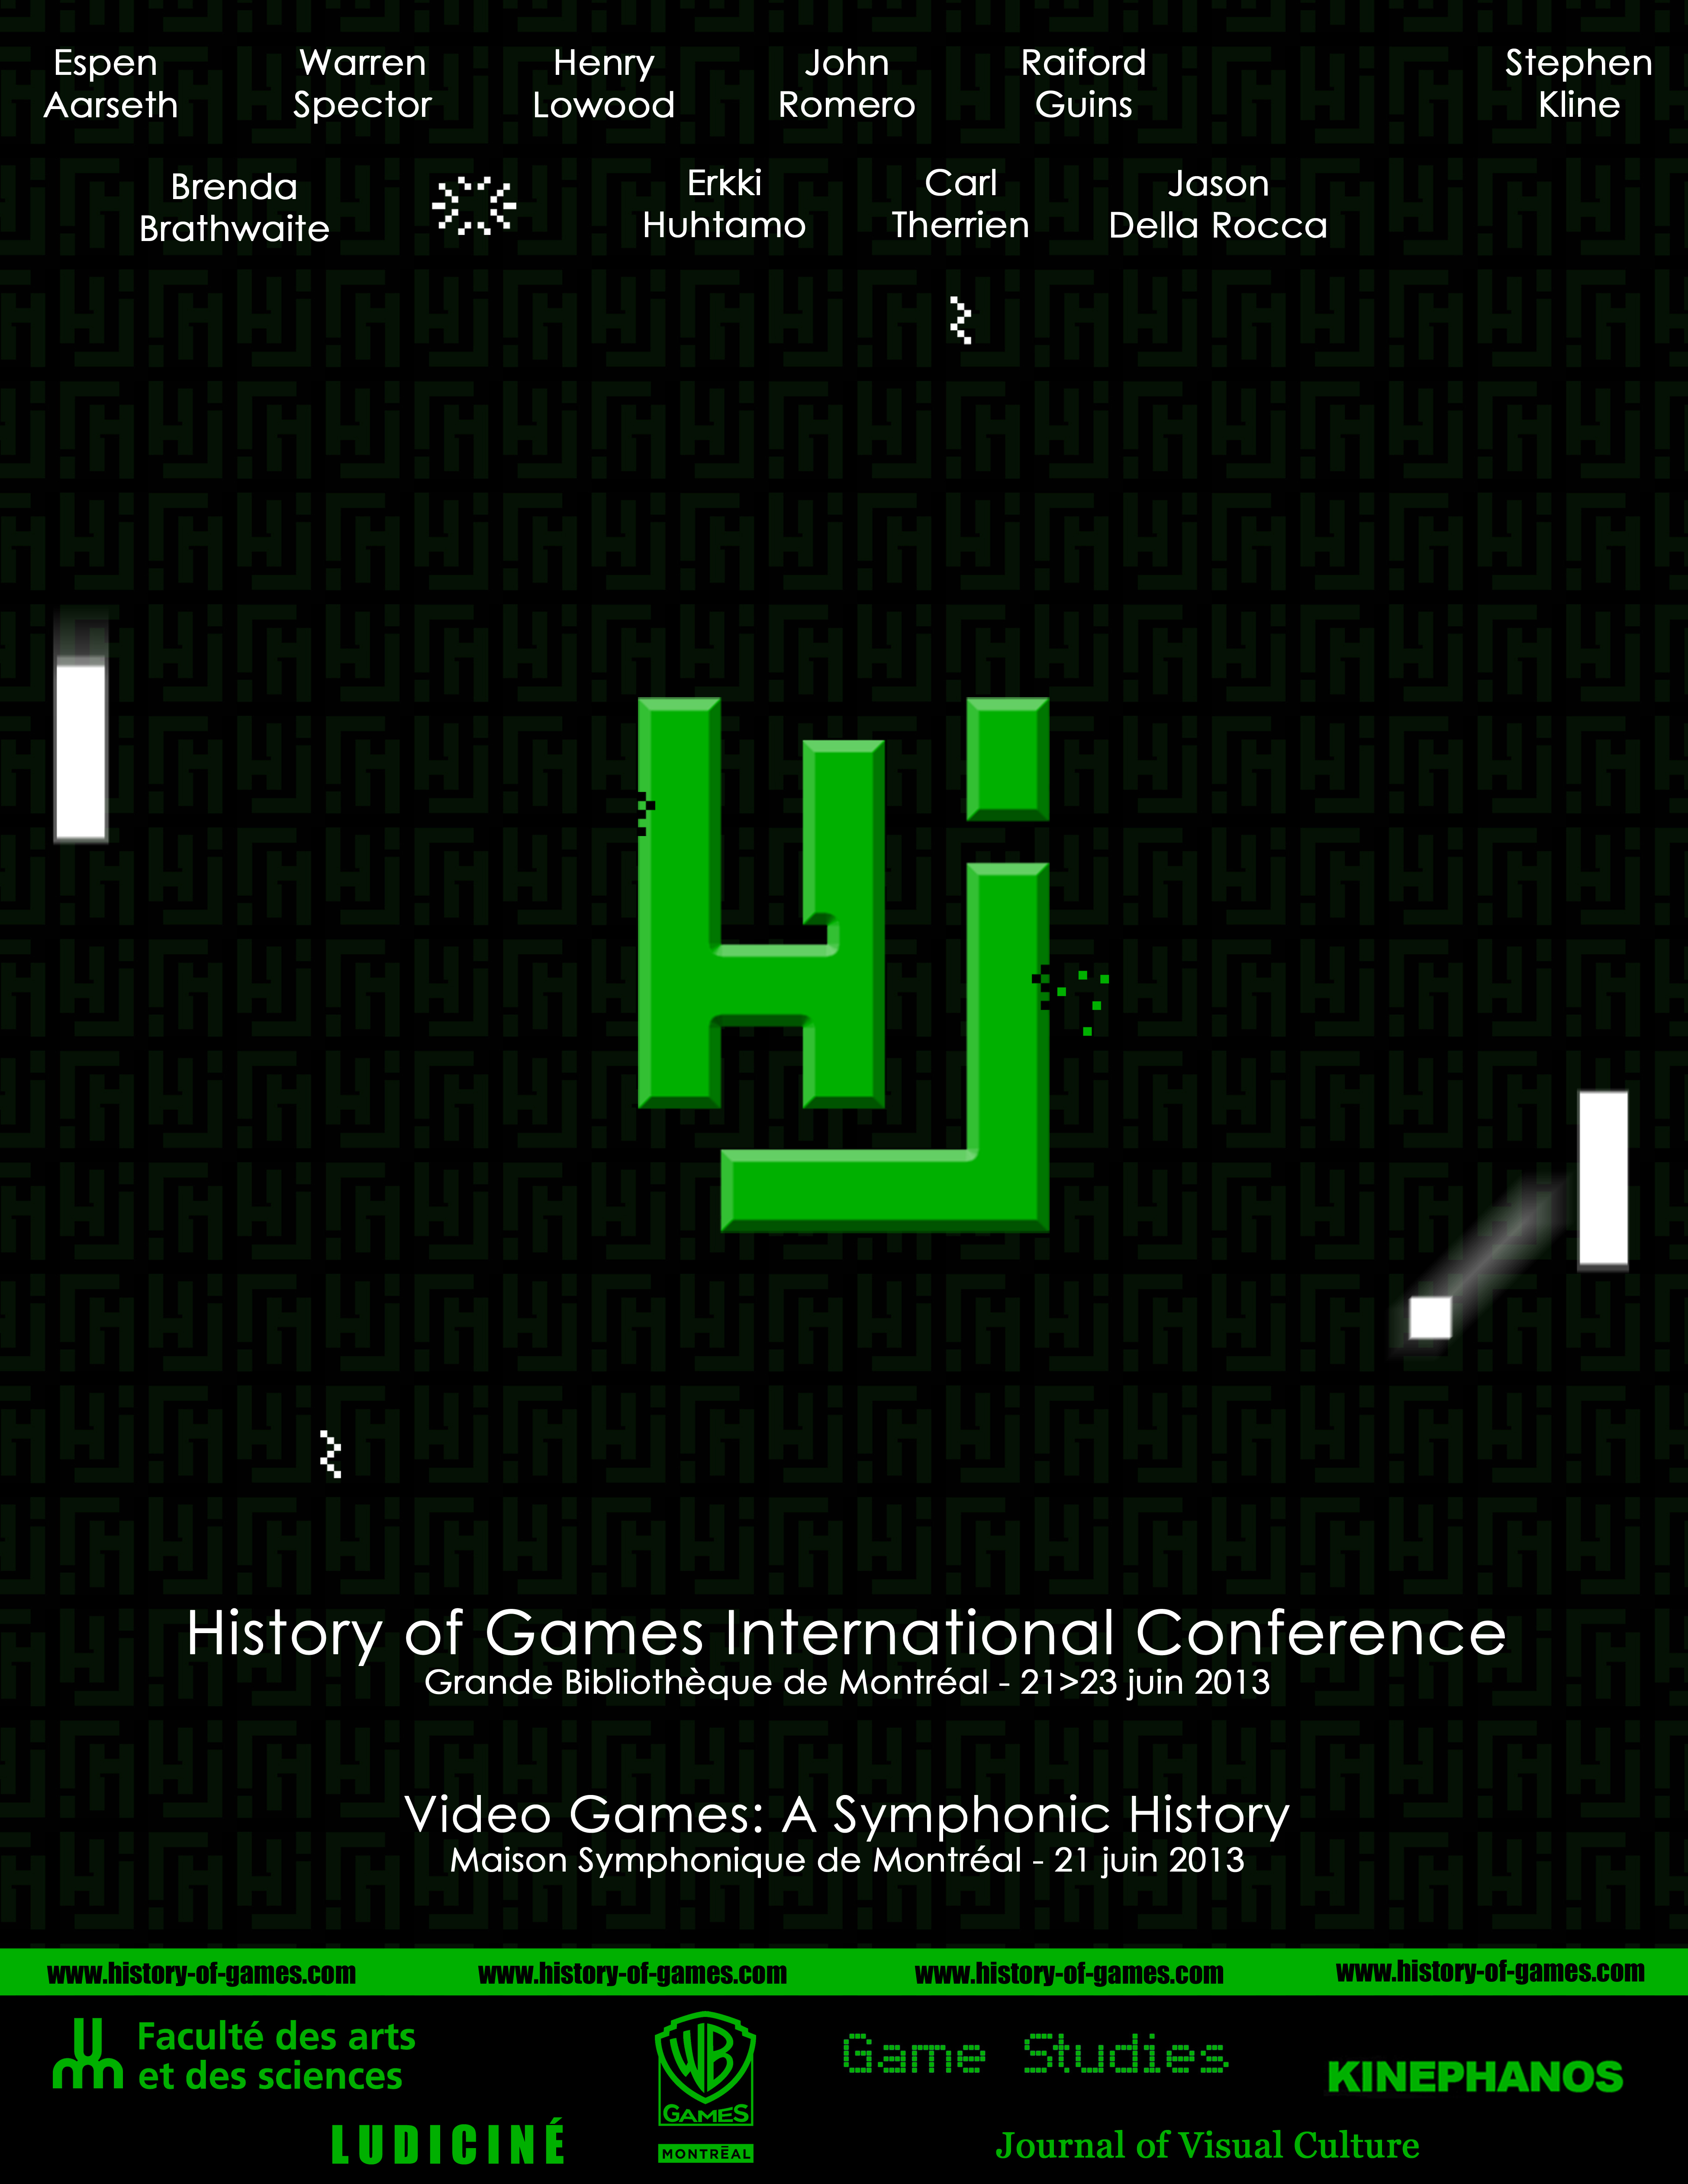 History of Games internation conference